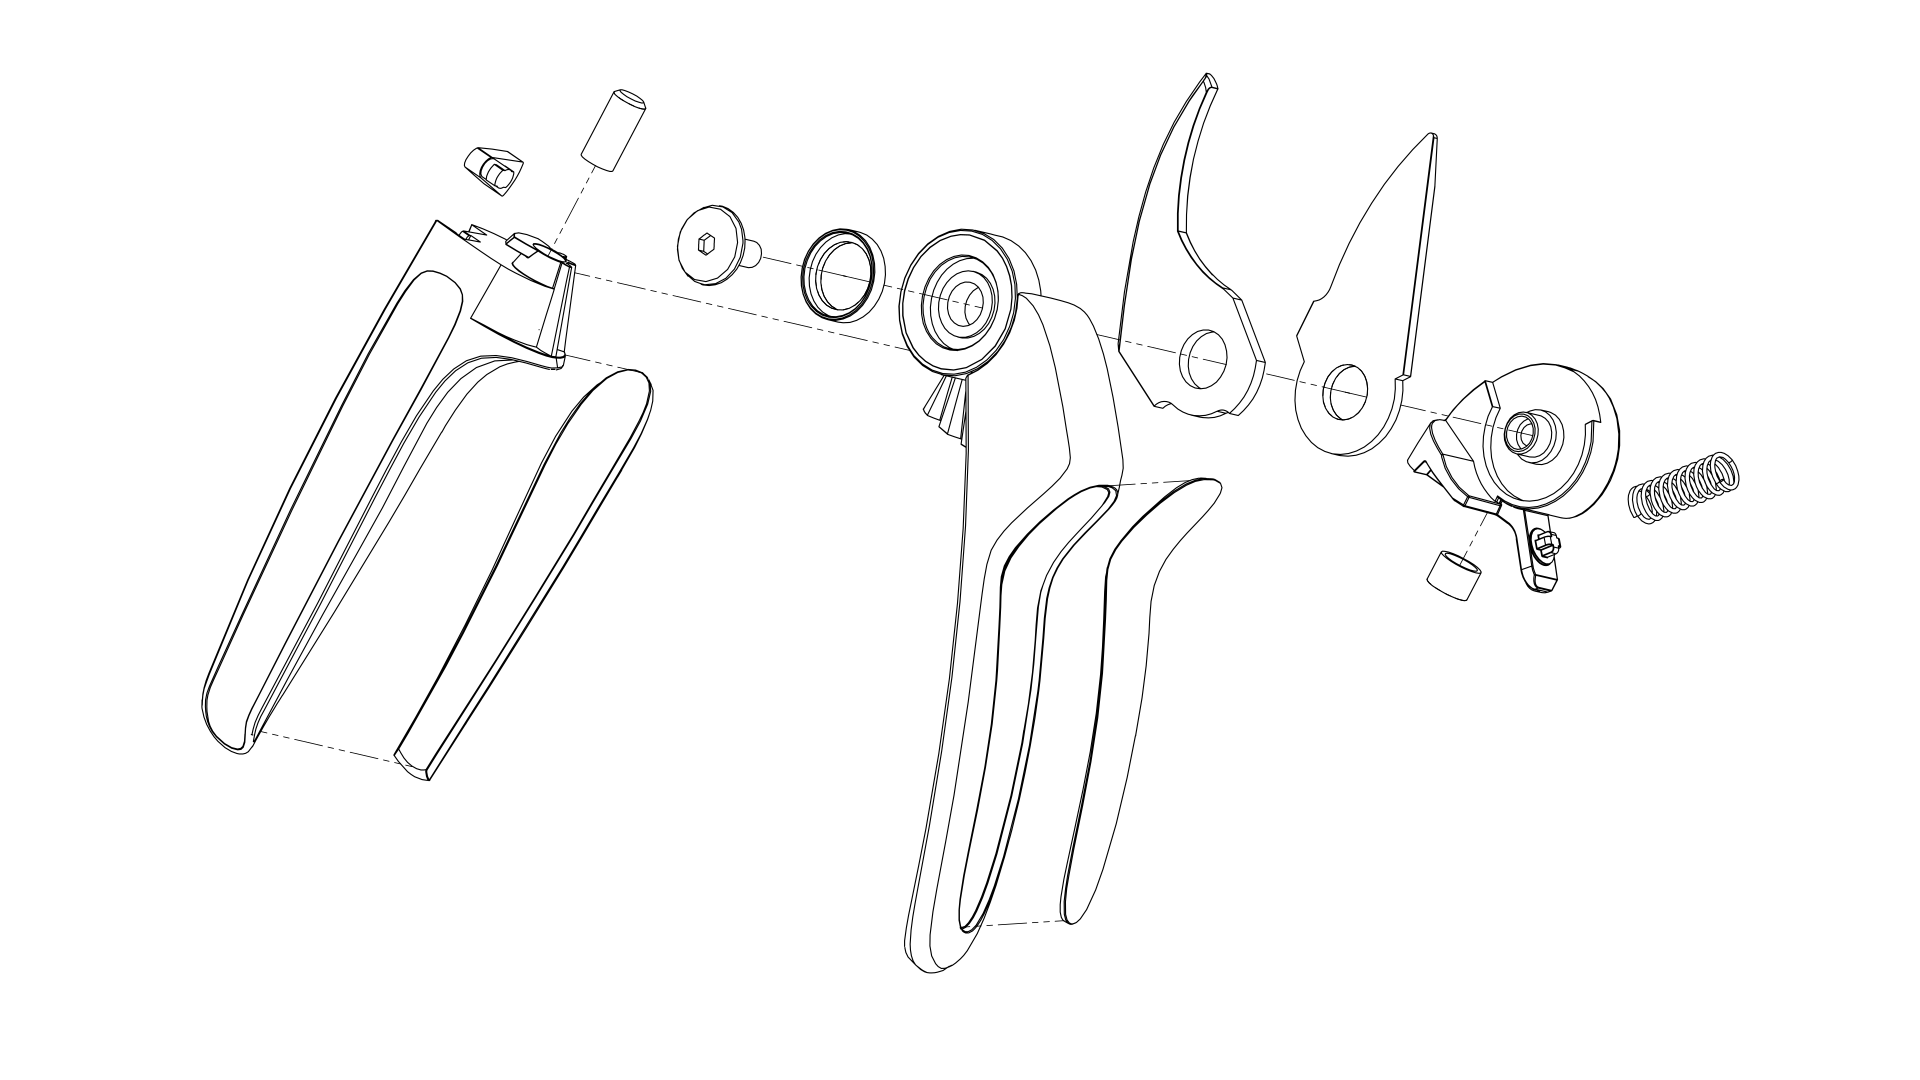 Technical drawing of redesigned pruner